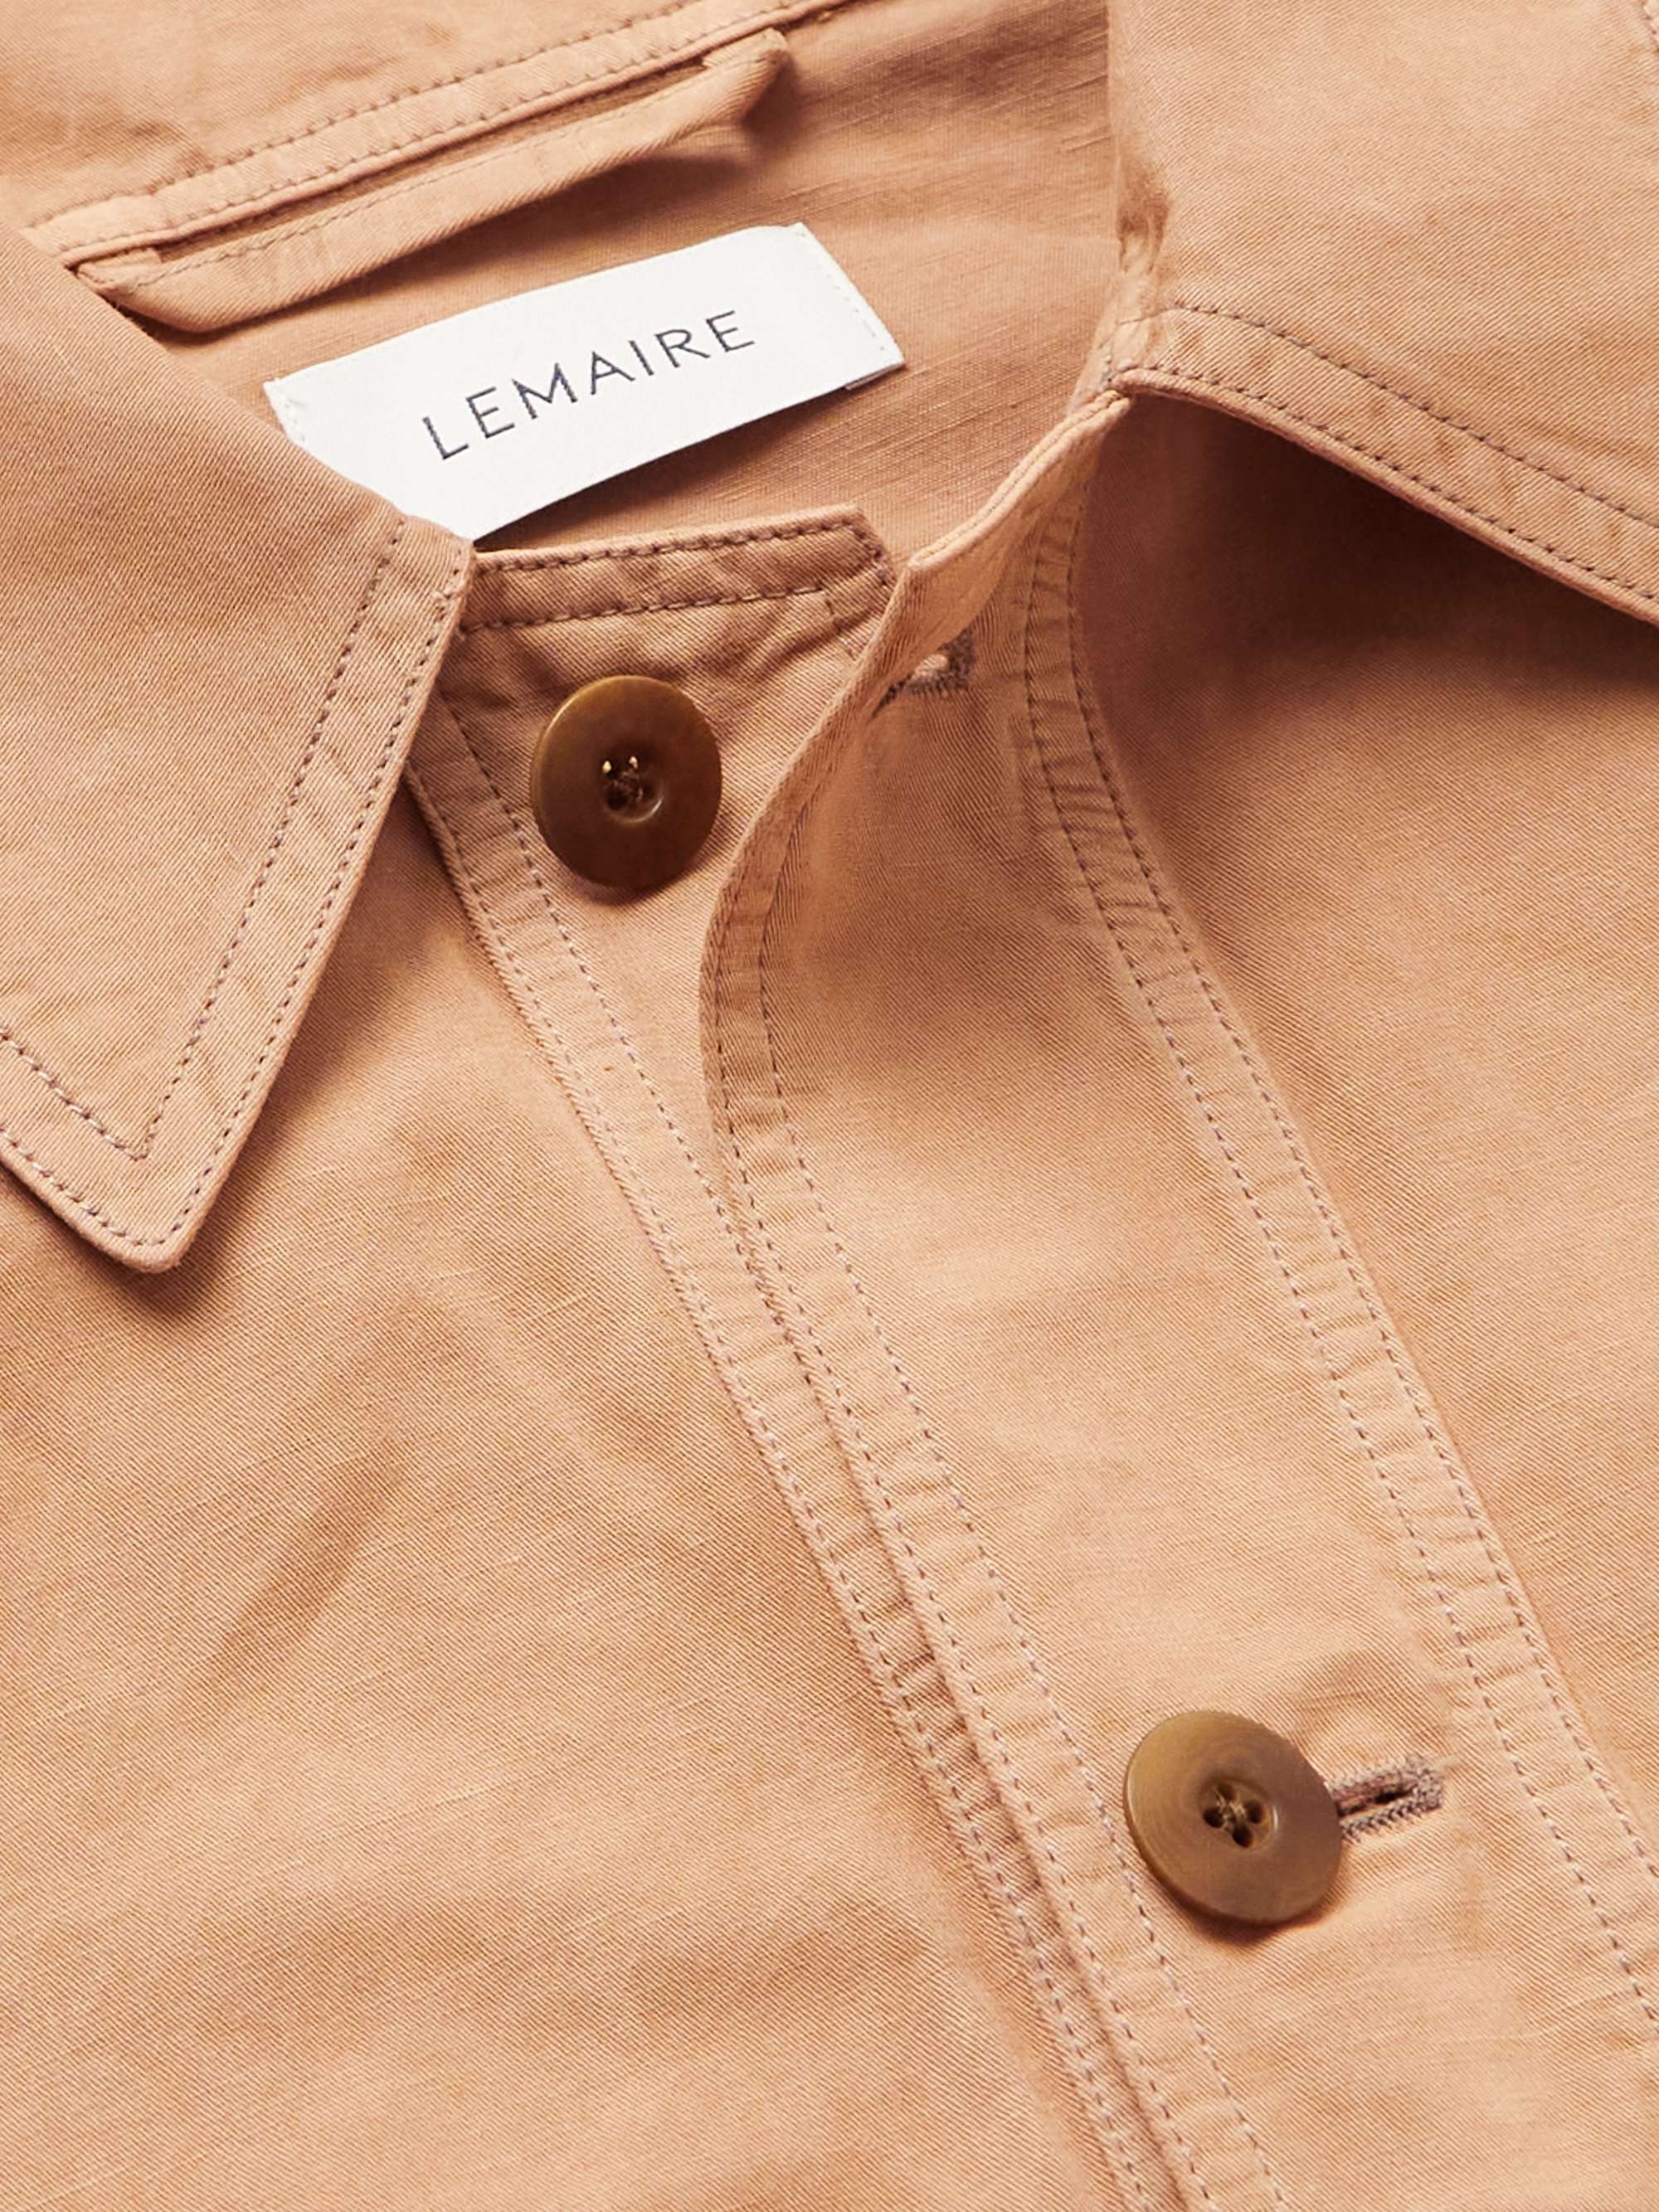 LEMAIRE Garment-Dyed Cotton and Linen-Blend Twill Shirt Jacket